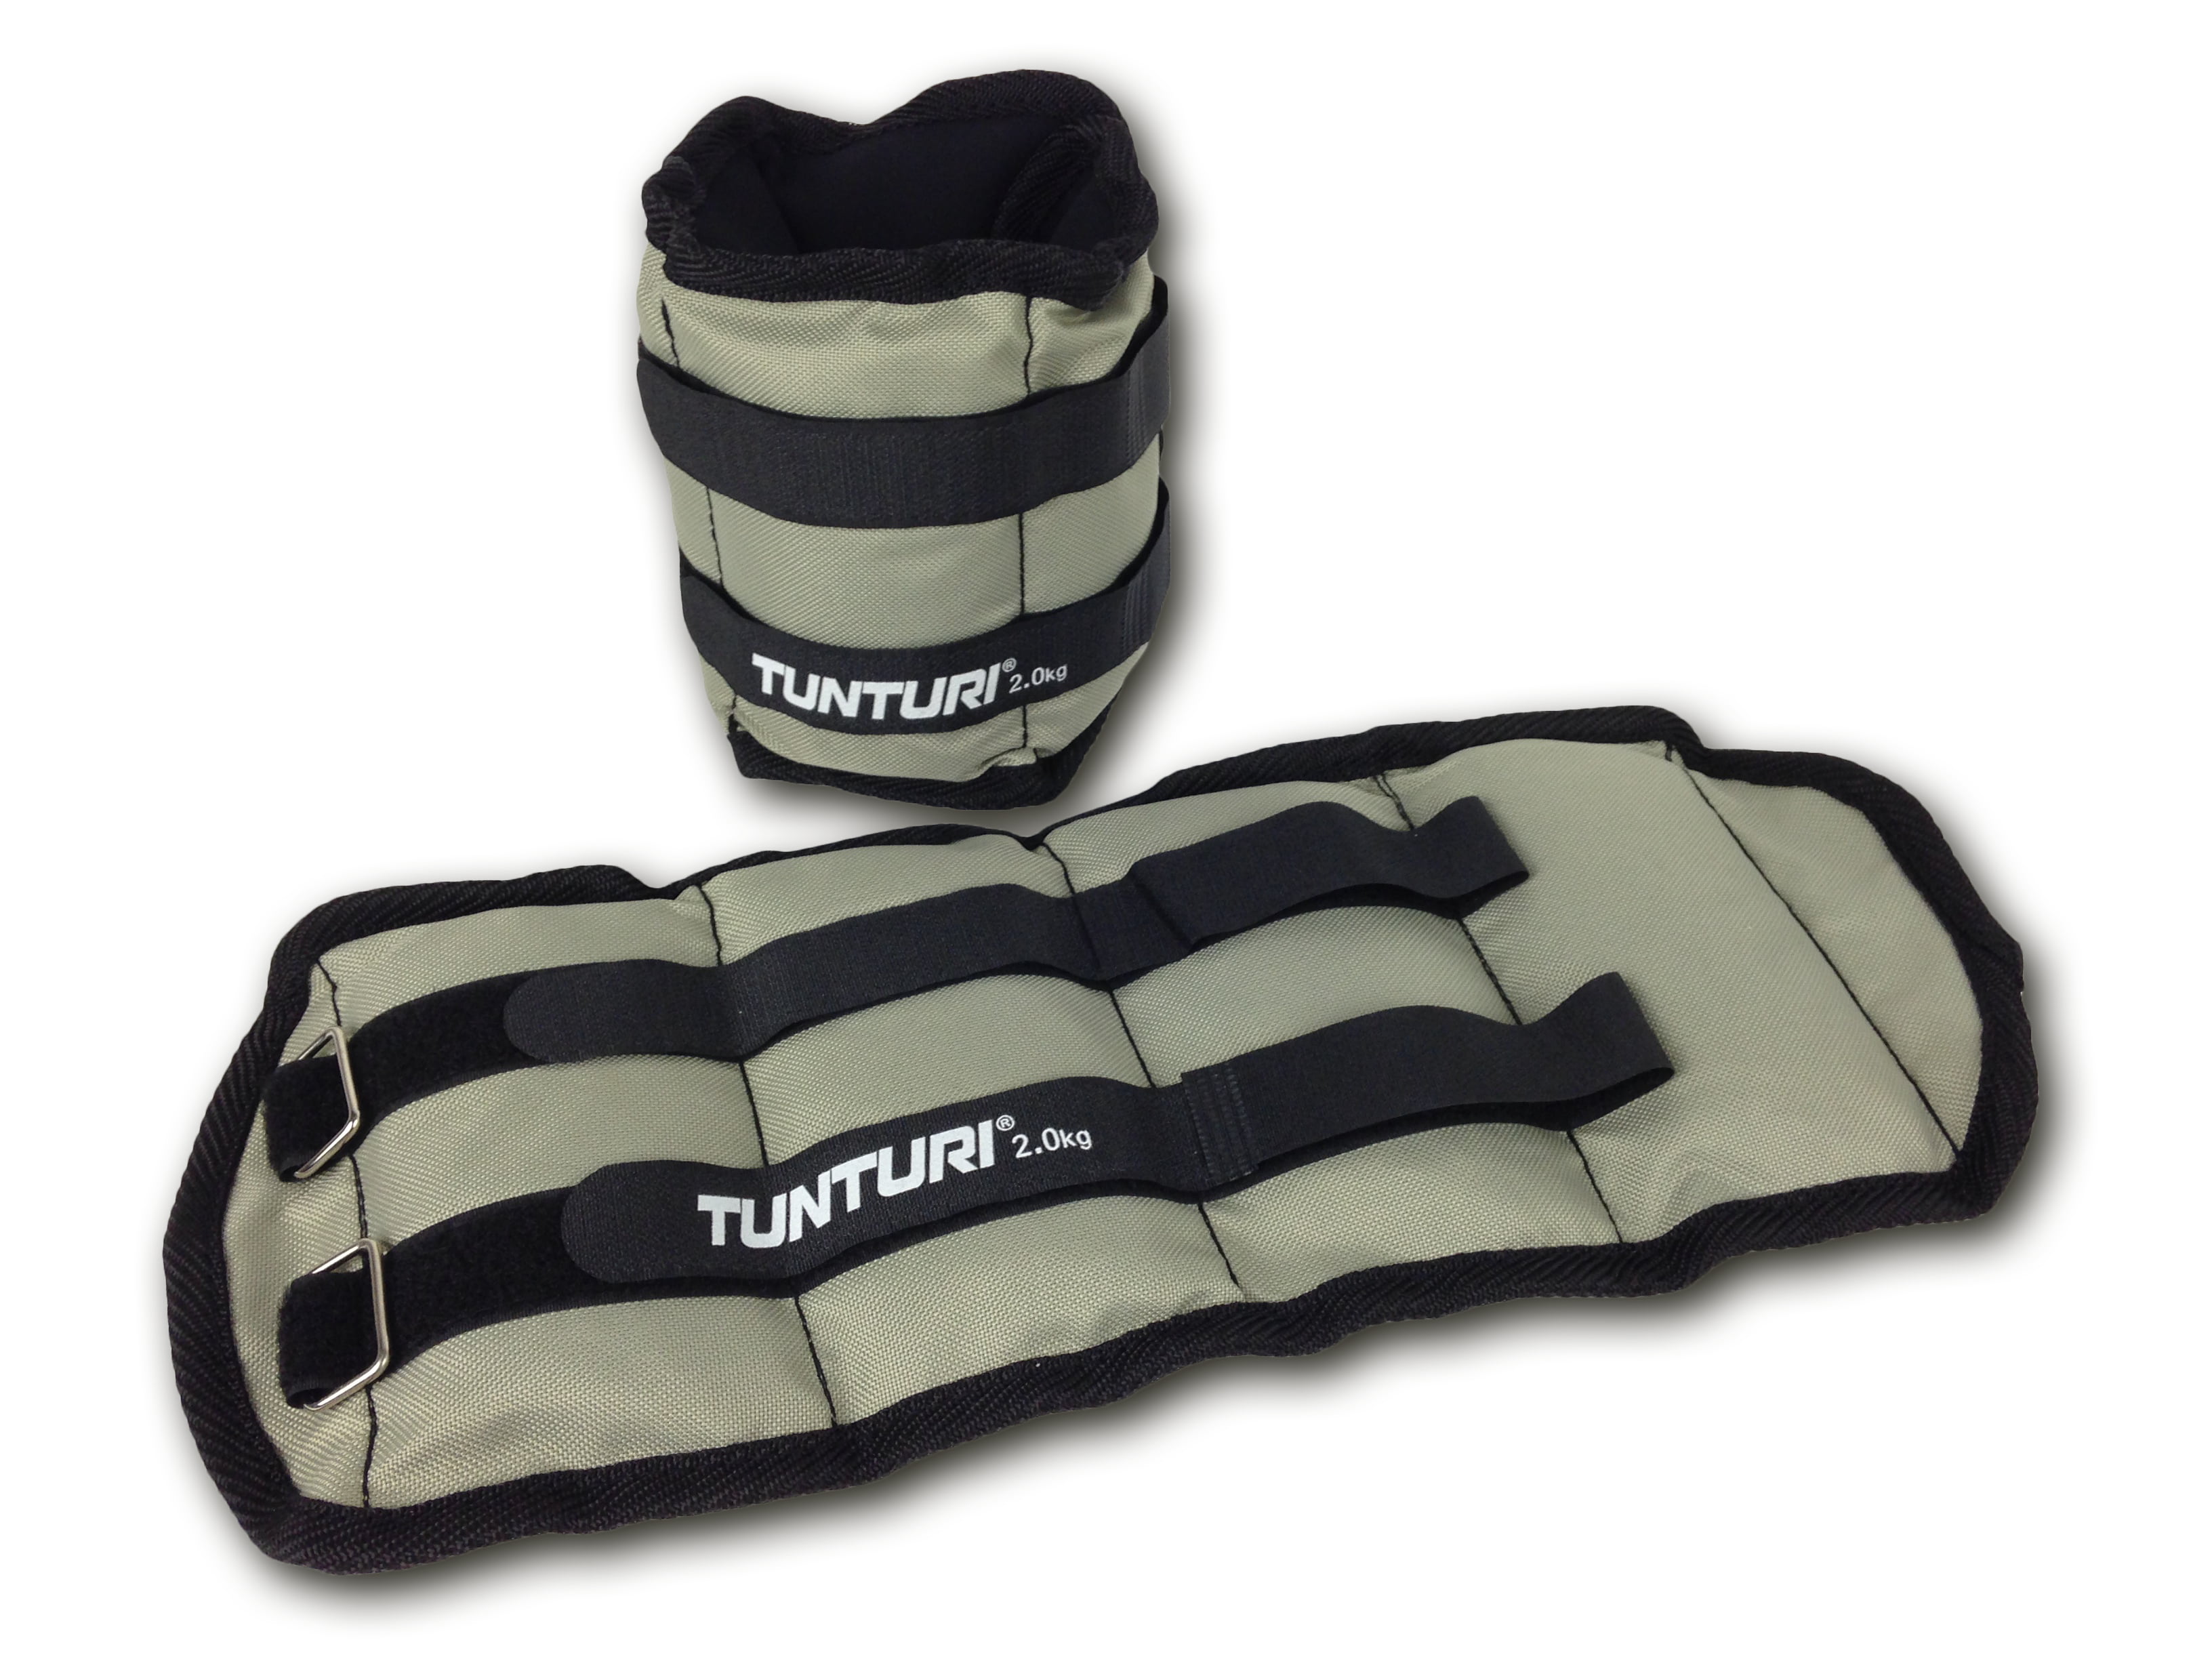 2 Pair 3 and 4 Weights Tunturi Arm/Leg Weights in 1